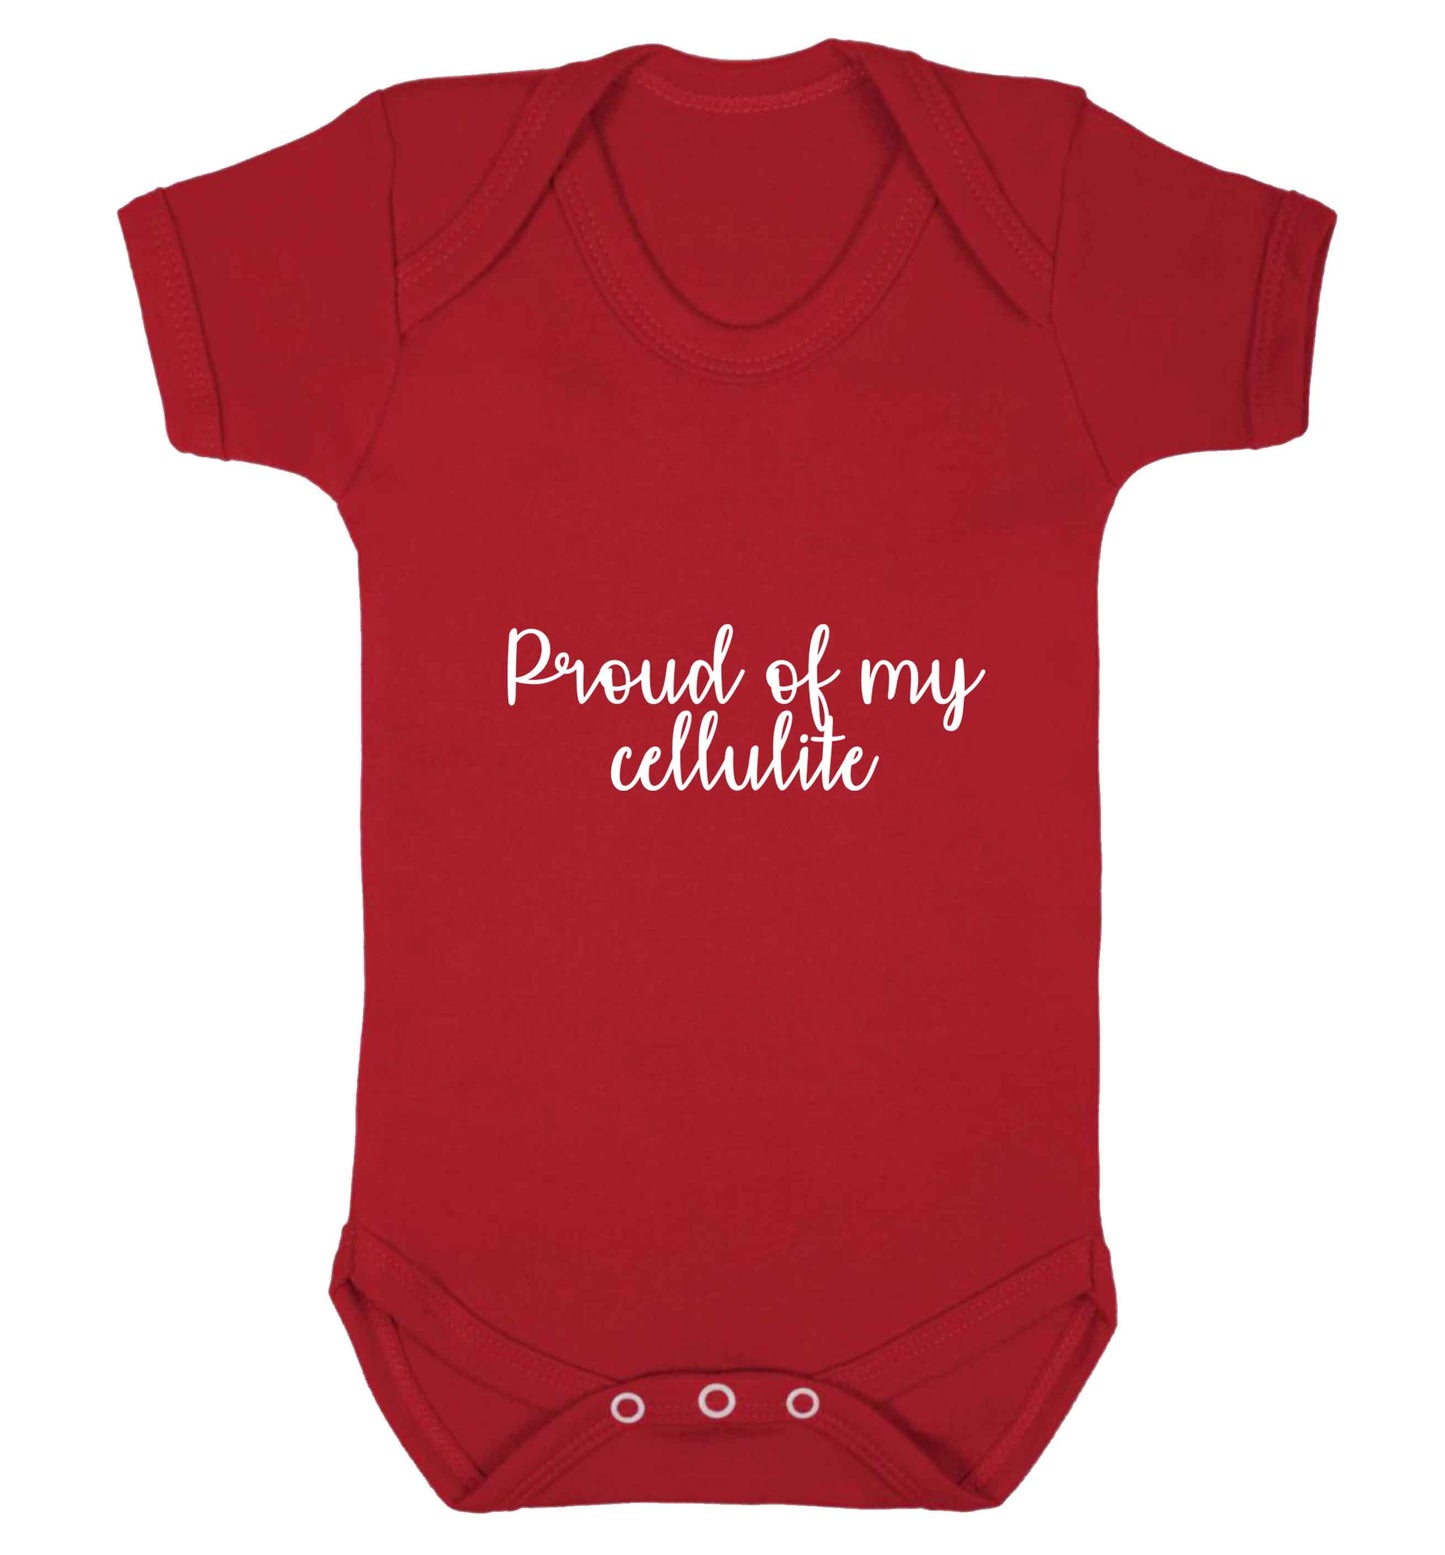 Proud of my cellulite baby vest red 18-24 months